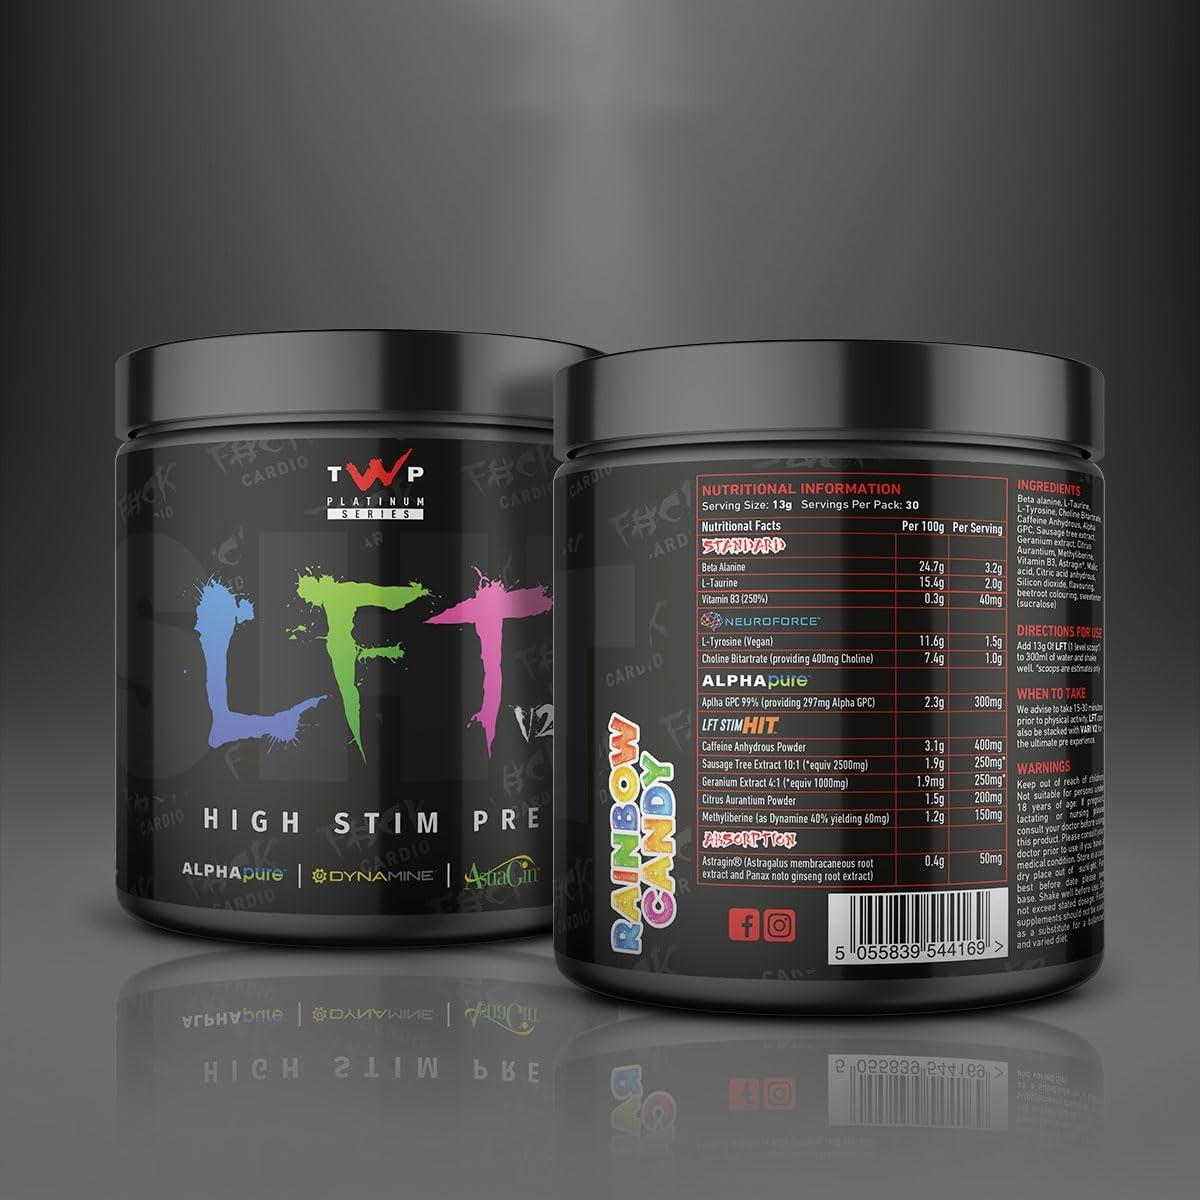 TWP Nutrition Platinum Series LFT V2 High Stim Strong Pre Workout 390g and  30 Servings 9 Great Flavours (Iron Thirst)